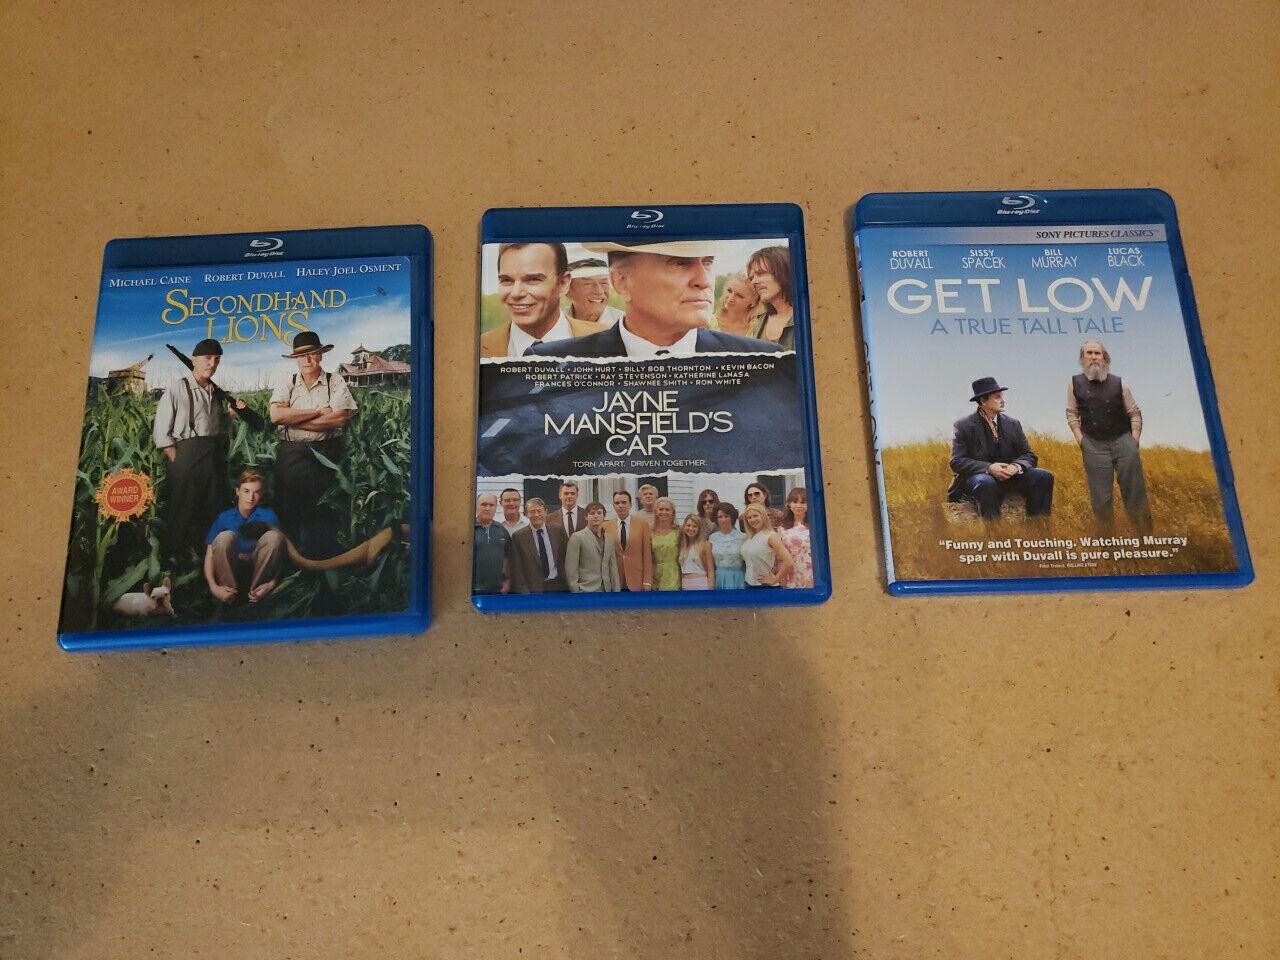 Lot Of 3 Robert Duvall Blu Rays Secondhand Lions Get Low Jayne Mansfield’s Car